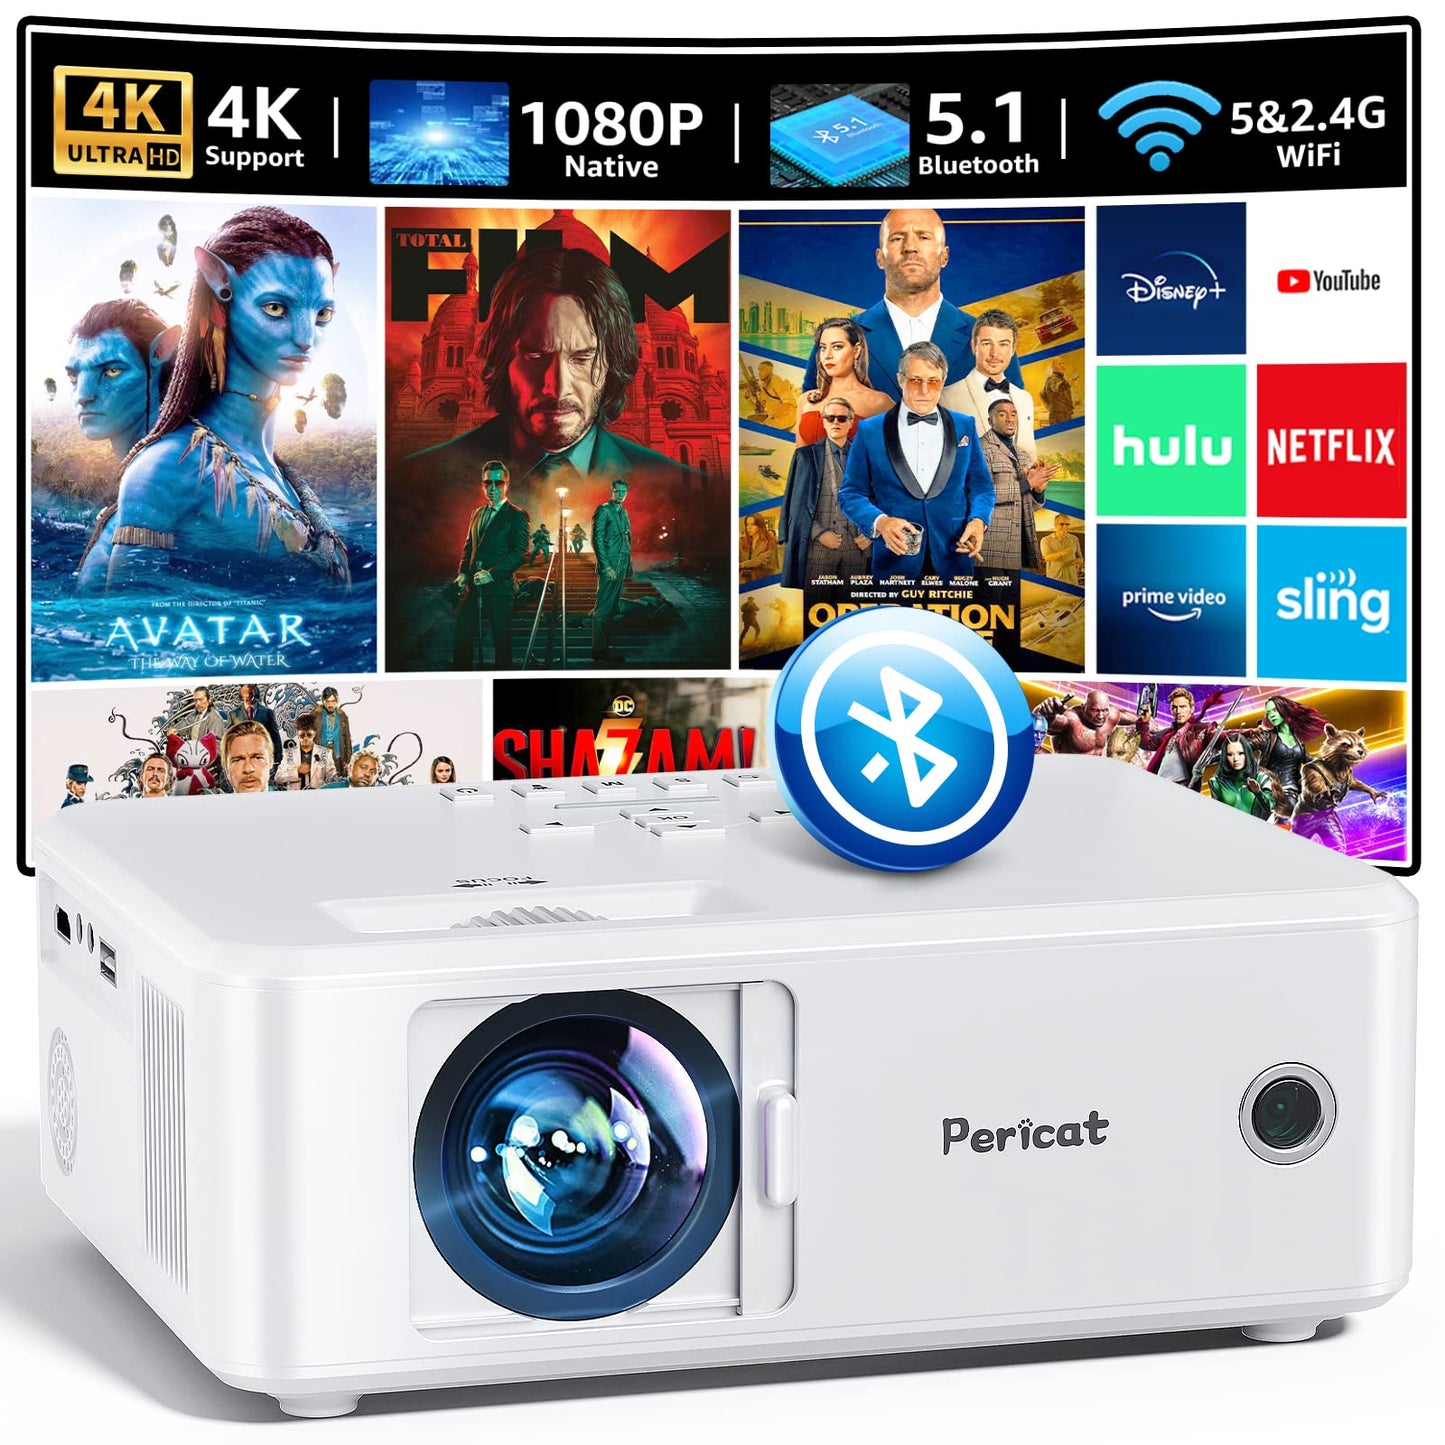 Pericat Projector with WiFi and Bluetooth, 5G WiFi Native 1080P Movie Projector, 9800L 4K Supported Portable Outdoor Projector